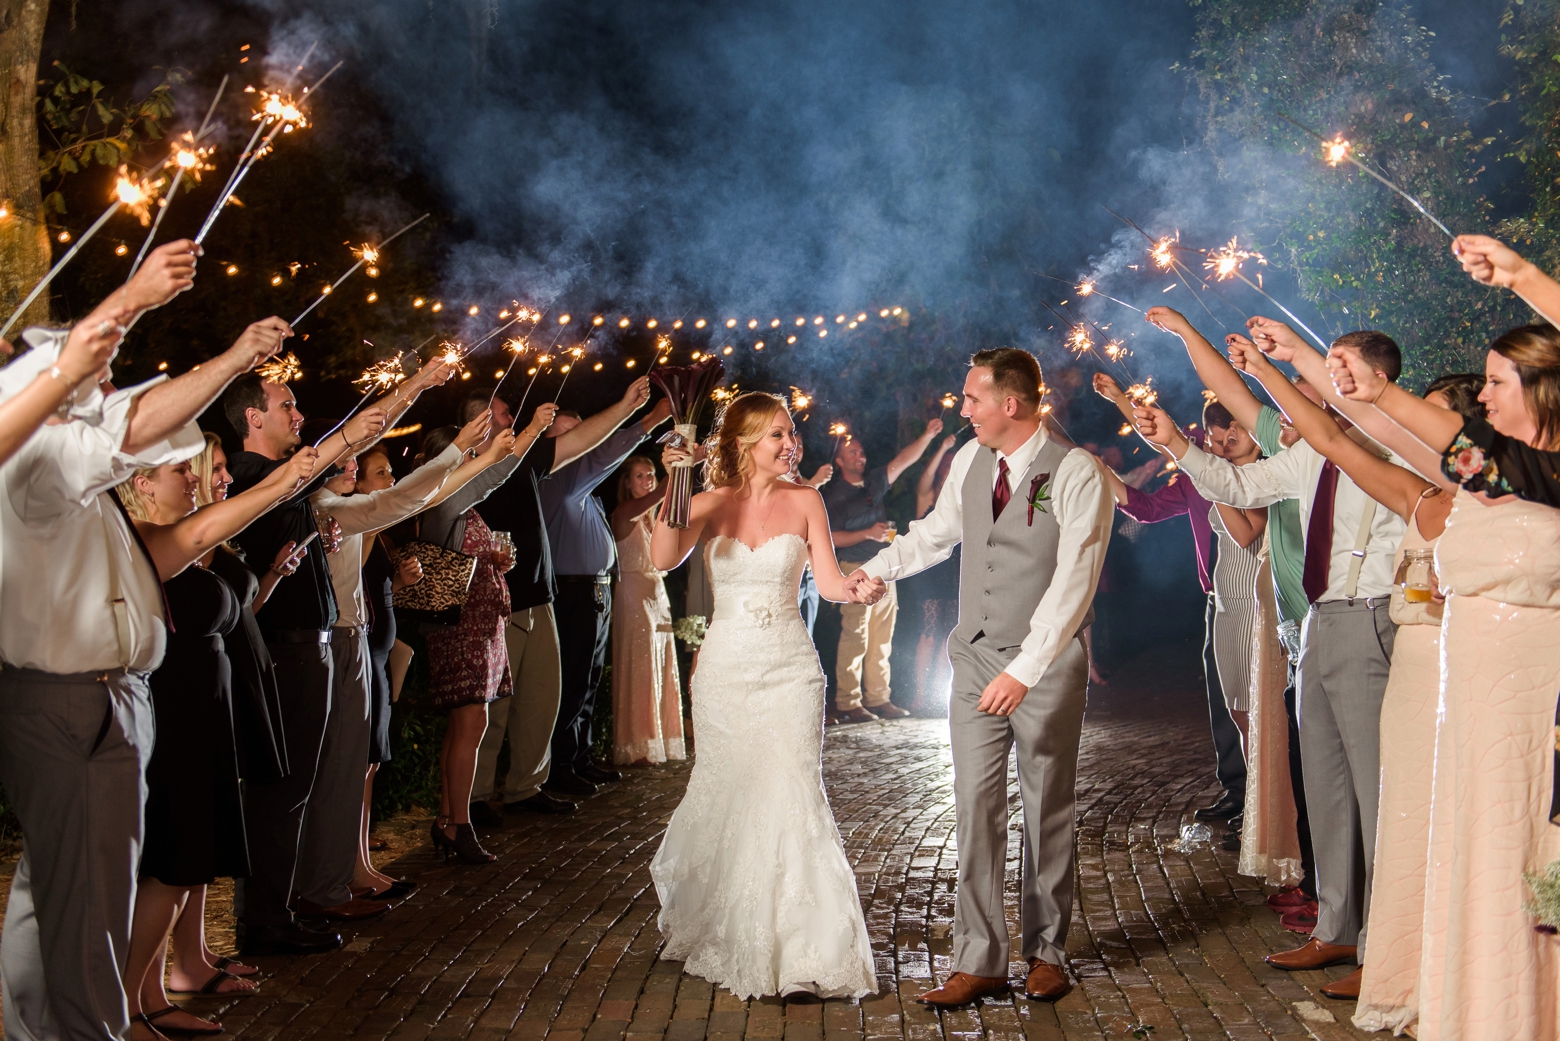 Bride and Groom exit their Cross Creek Ranch wedding day under a line of Sparklers held by friends and family